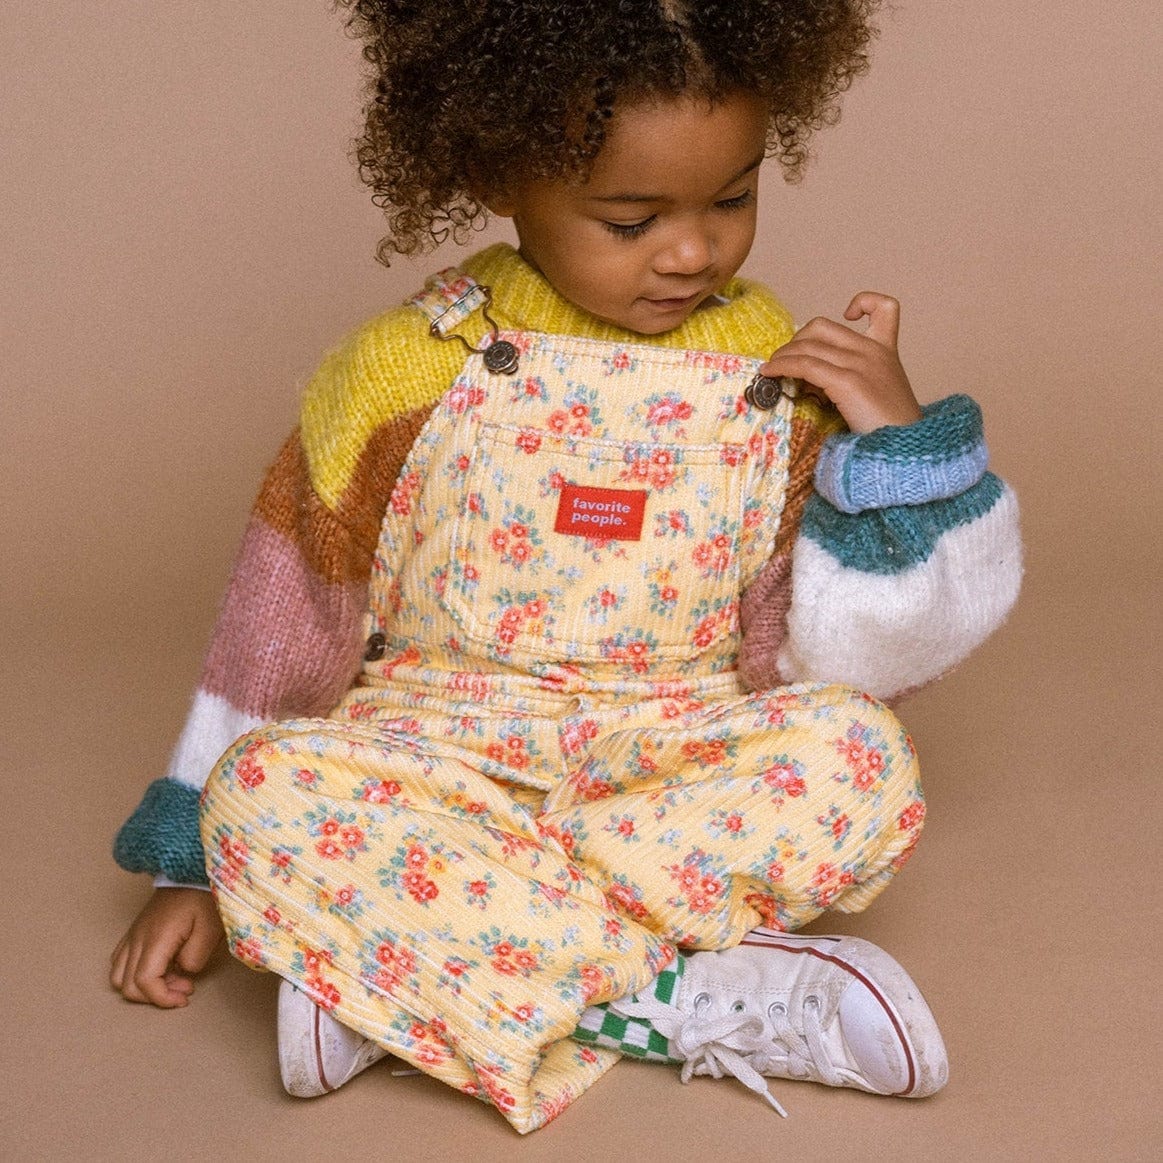 My 5 Fave Kids Dungaree Brands